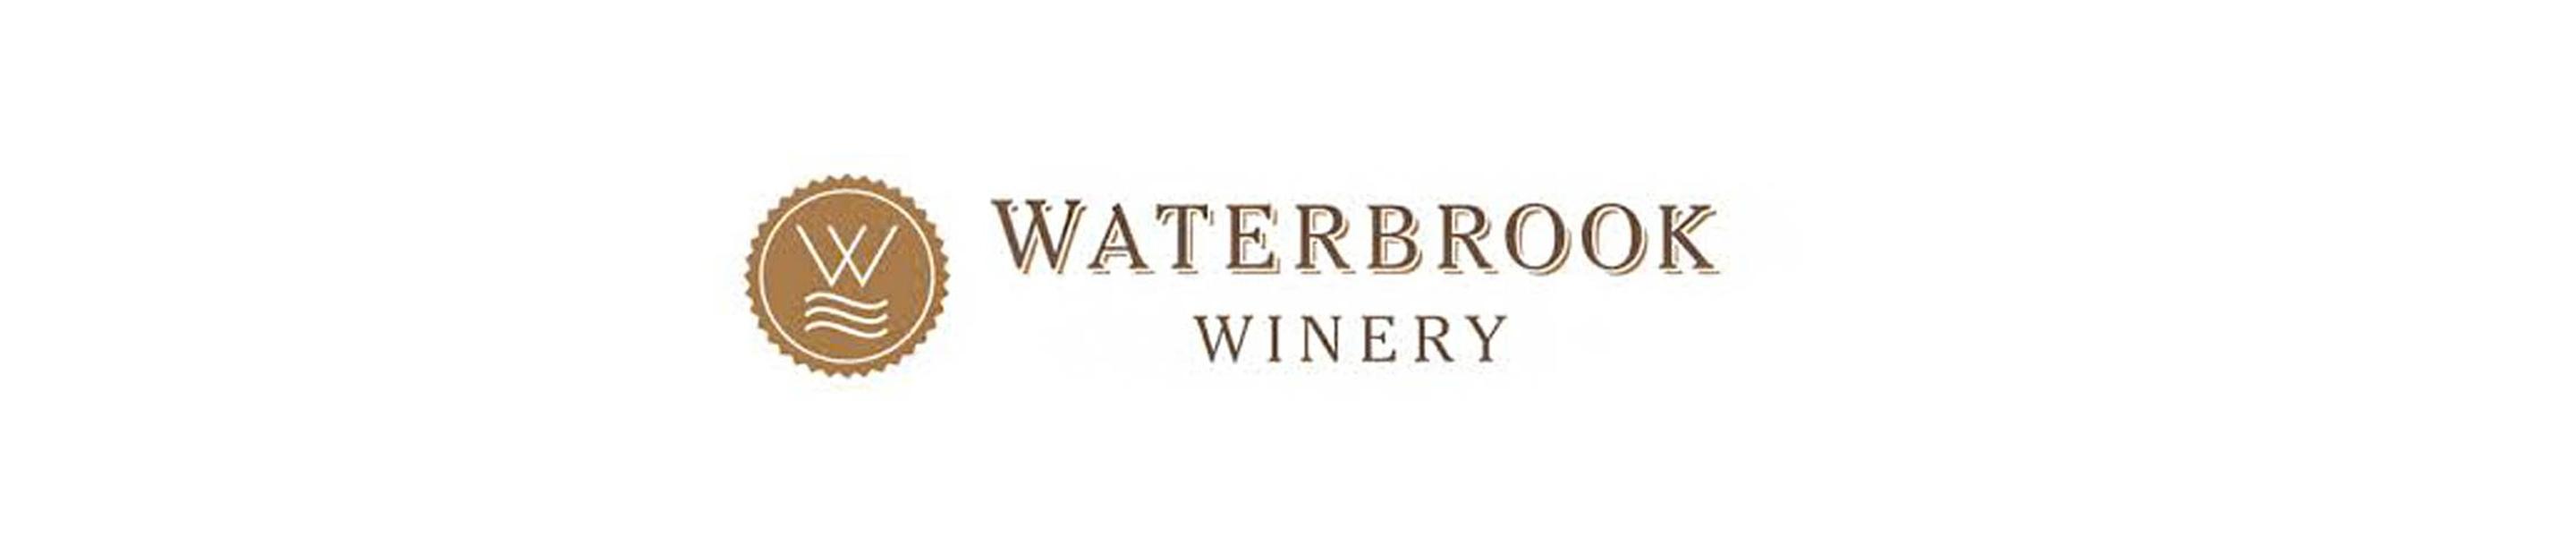 Established in 1984, Waterbrook Winery is a Walla Walla, Washington pioneer. Today it features a state-of-the-art winery, a world-class tasting room and hospitality program, and a 49-acre estate vineyard in the Walla Walla Valley AVA. From vintage to vintage, winemaker John Freeman masterfully handcrafts wines that are true-to-variety, full of depth and structure, and representative of the Columbia Valley’s best. Whether for everyday casual or weekend occasions, Waterbrook wines offer authentic Walla Walla heritage paired with distinctively modern Northwest style, resulting in approachable, elegant wines of extraordinary value and superior acclaim.